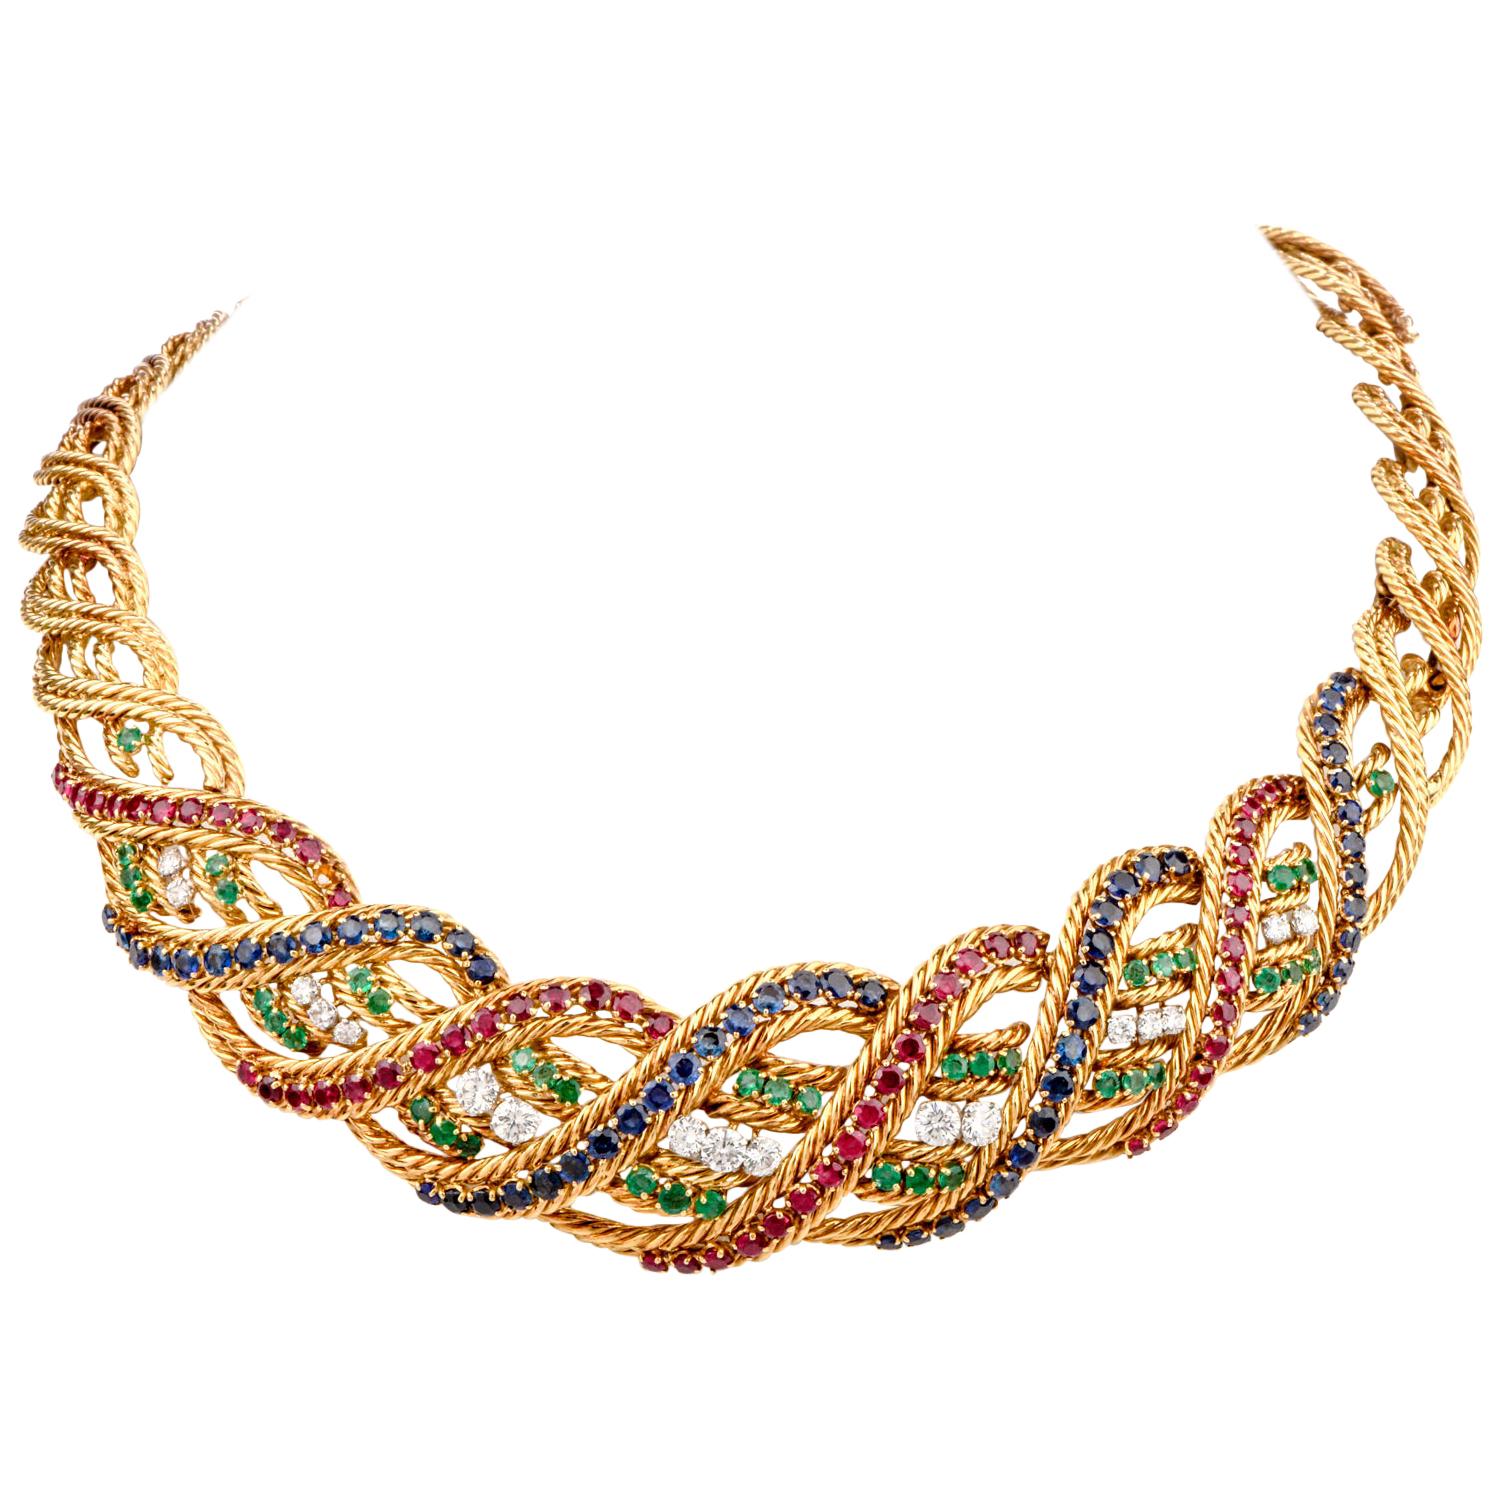 This stately vintage 1960-1970 French Boucheron Ensemble was created with a criss cross woven pattern and crafted in 18K gold. 

Neckalce:
Adorning the centermost part of this choker are round faceted Diamonds, Rubies, Emeralds and Sapphires.15